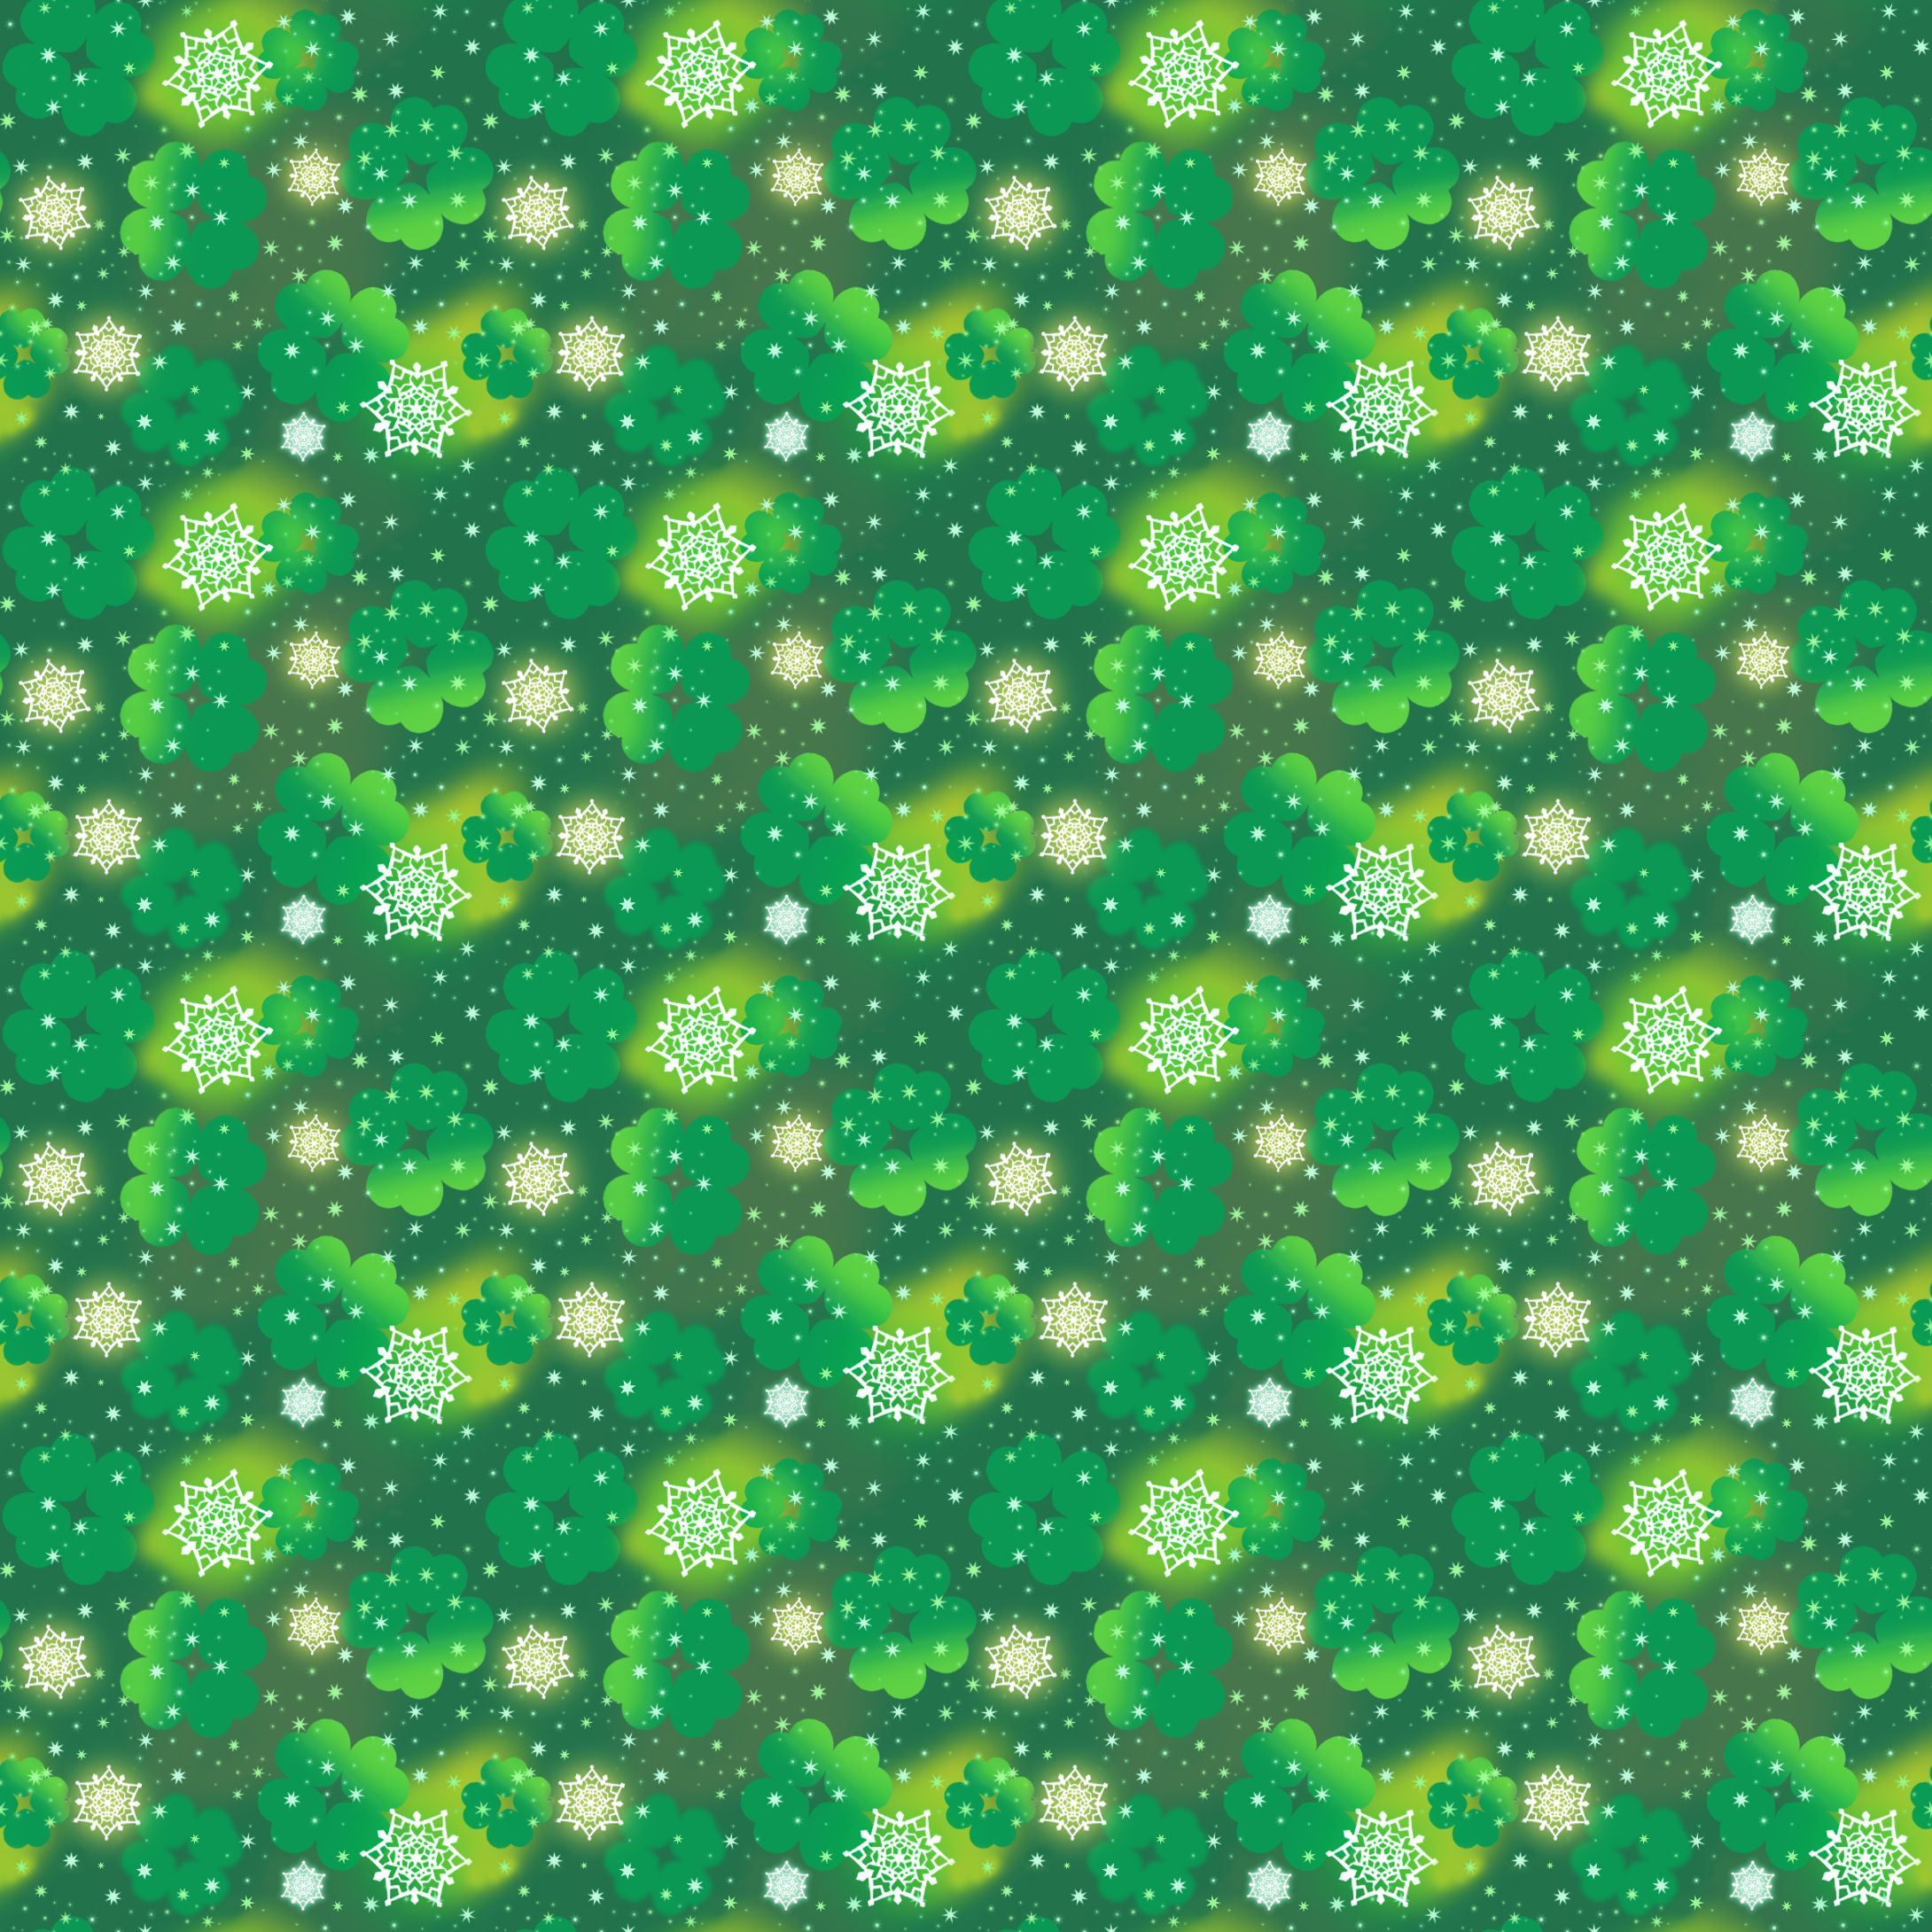 100857 Screensavers and Wallpapers Snowflakes for phone. Download textures, snowflakes, patterns, green, texture, clover pictures for free